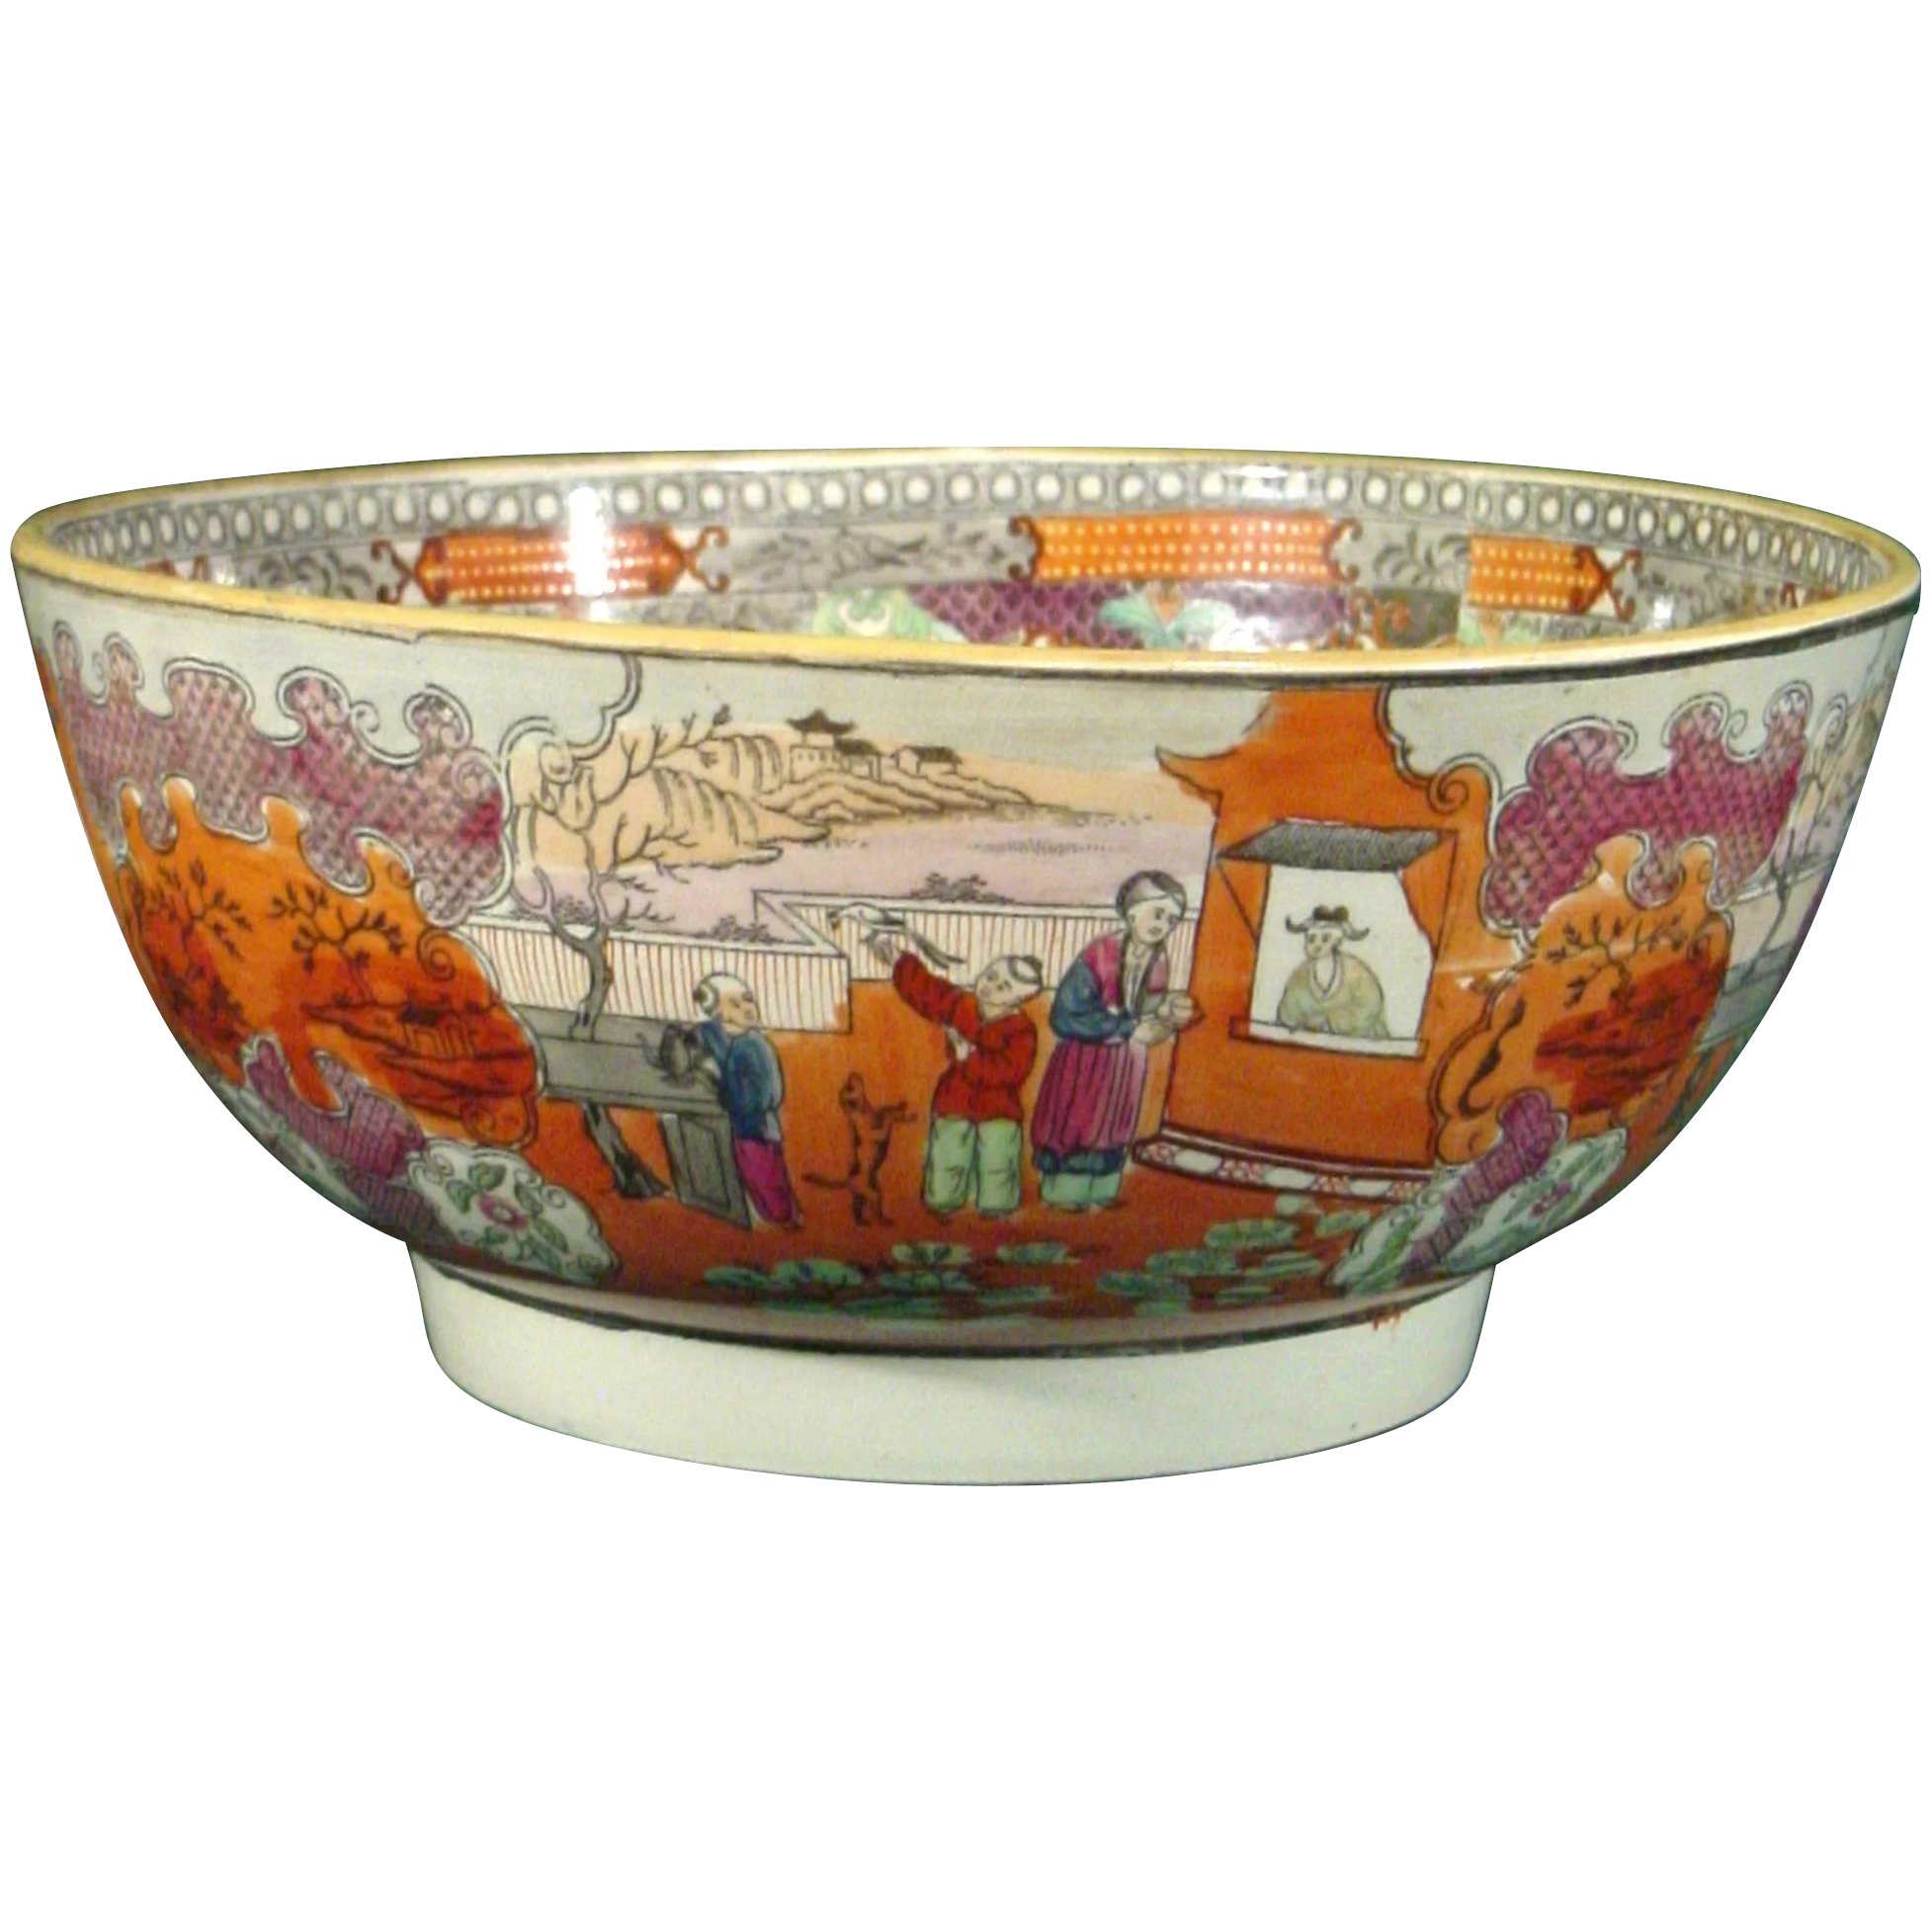 Antique-Pottery-Punch-Bowl-Hall-Pattern-pic-1A-2048_10.10-437a0172-f.jpg